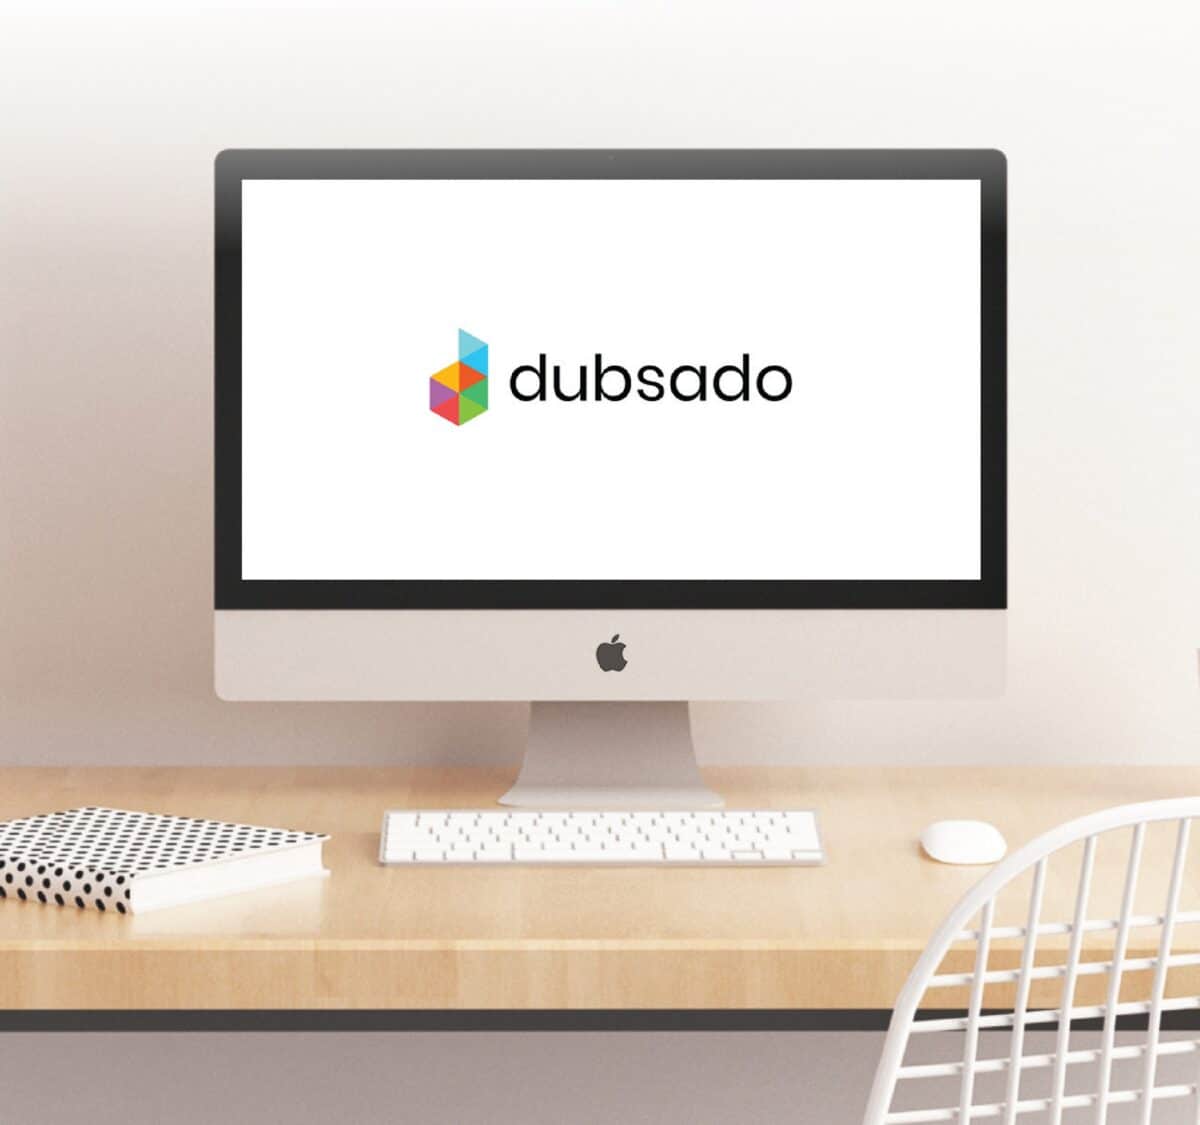 A computer on a desk with the Dubsado logo on the screen